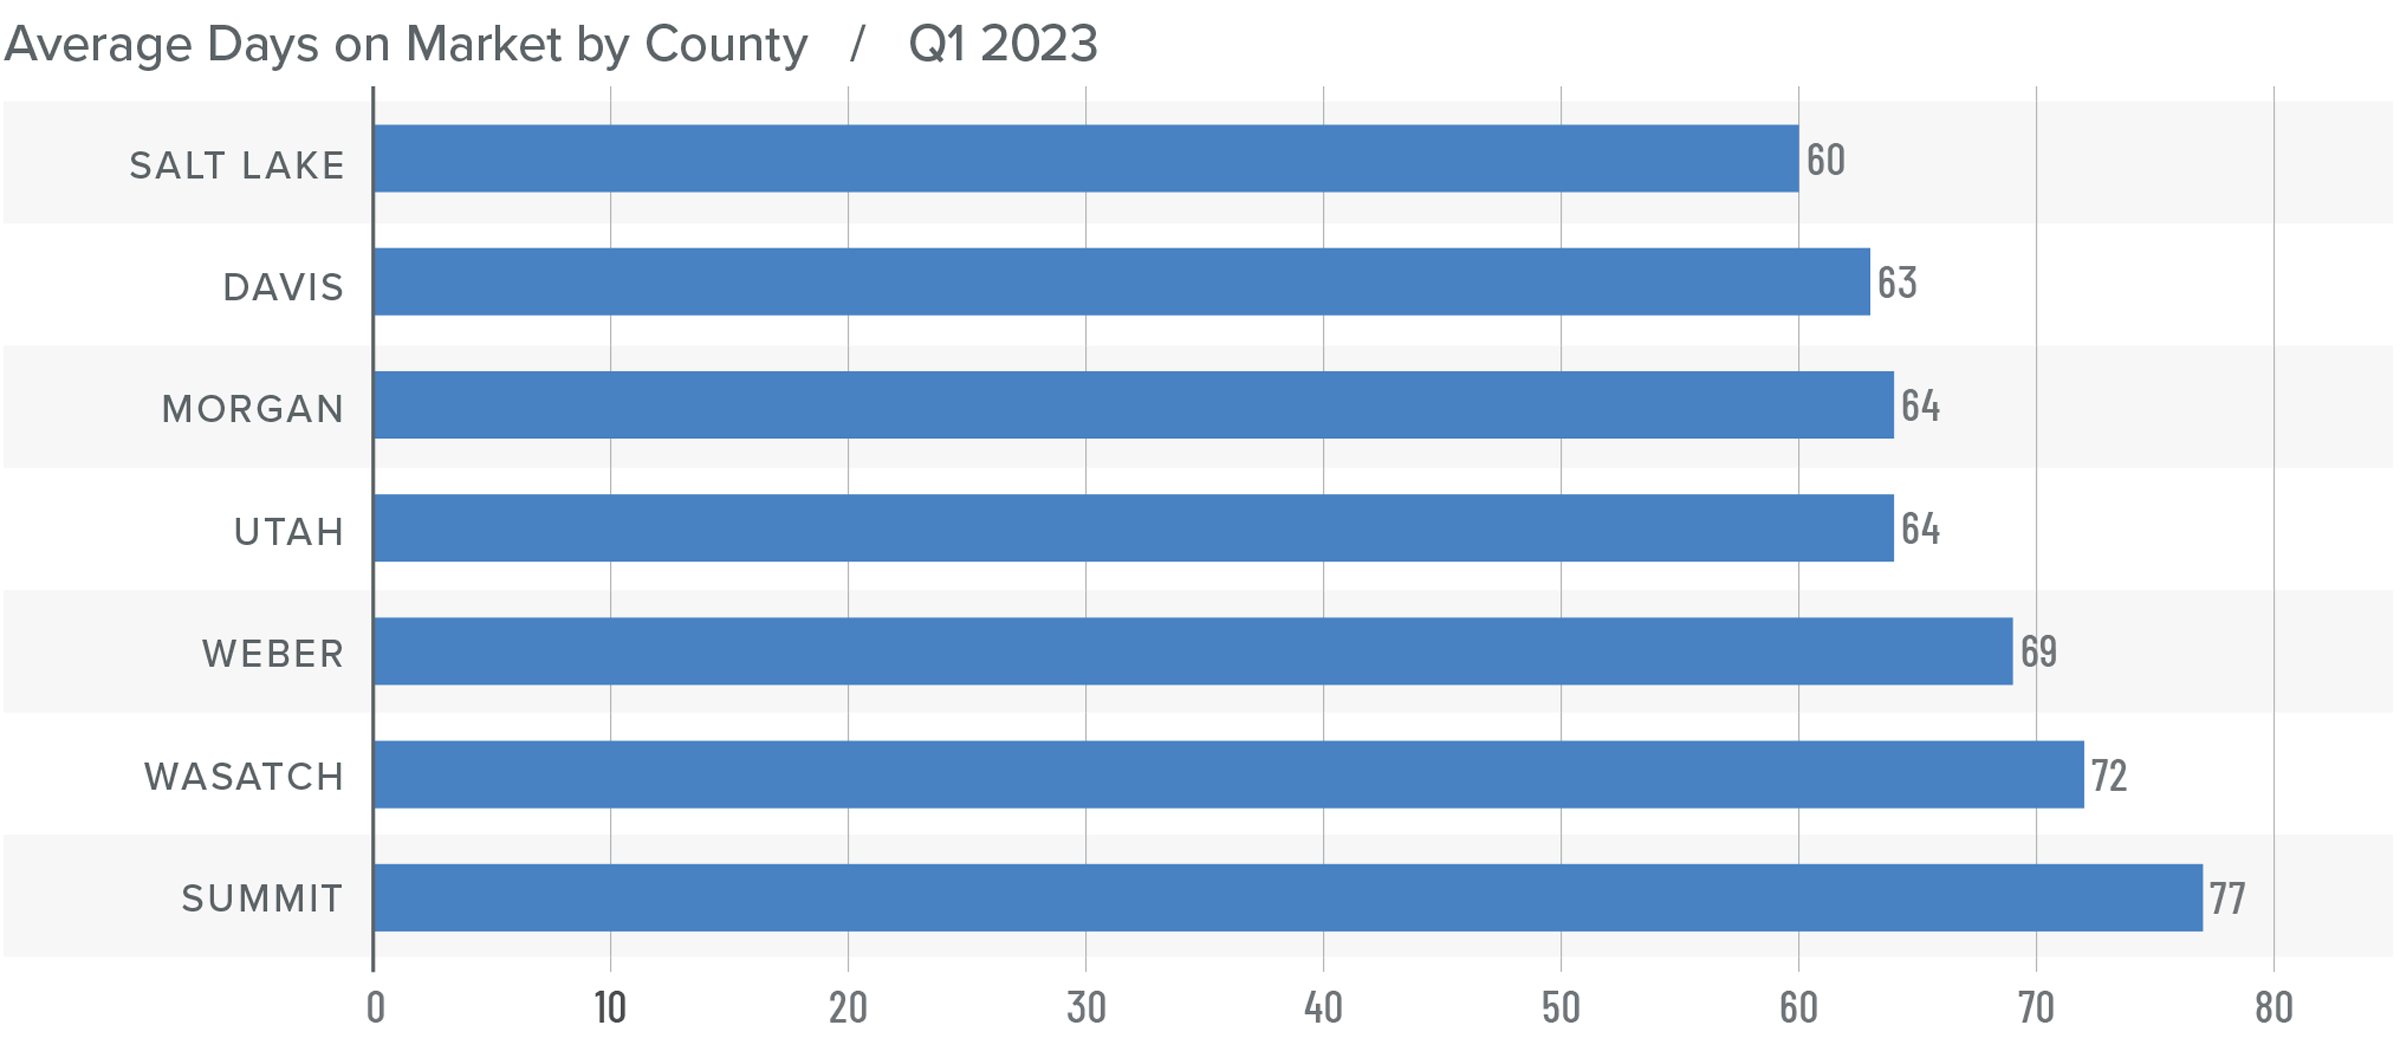 A bar graph showing the average days on market for homes in various counties in Utah for Q1 2023. Salt Lake County has the lowest DOM at 60, followed by Davis at 63, Morgan and Utah at 64, Weber at 69, Wasatch at 72, and Summit at 77.